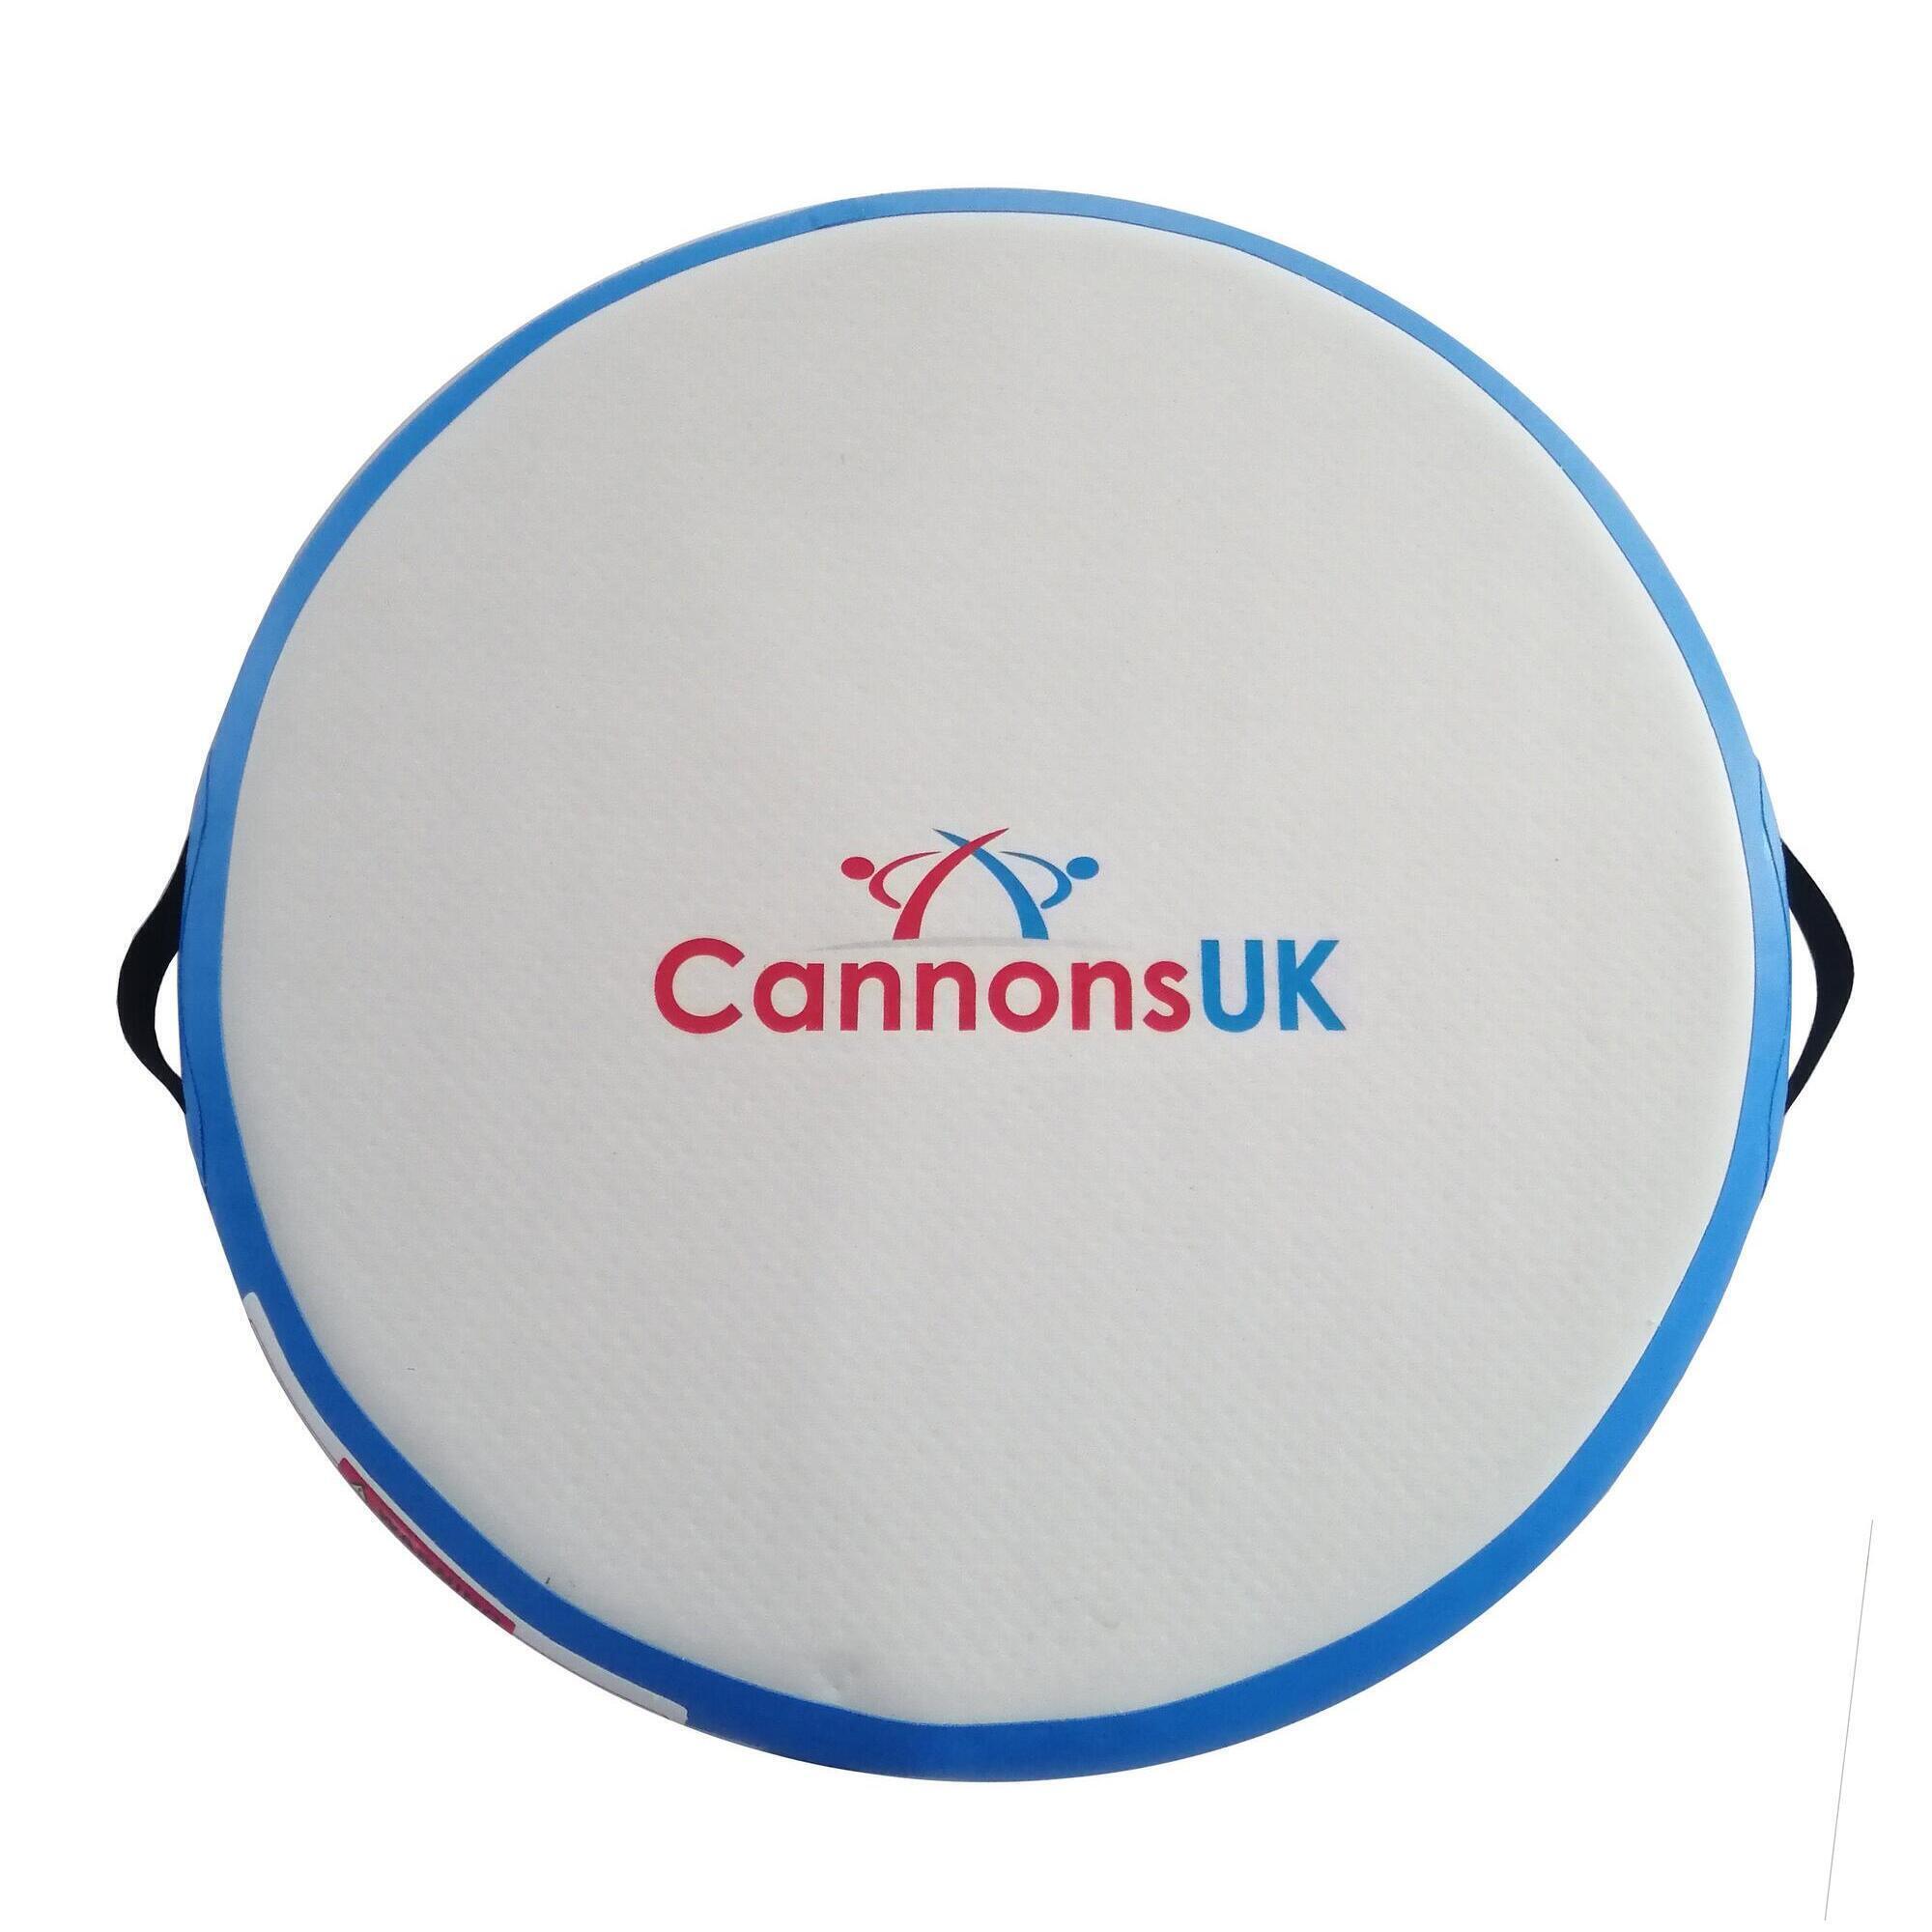 CANNONS UK Cannons Uk Air Track Pro Air Spot, Blue